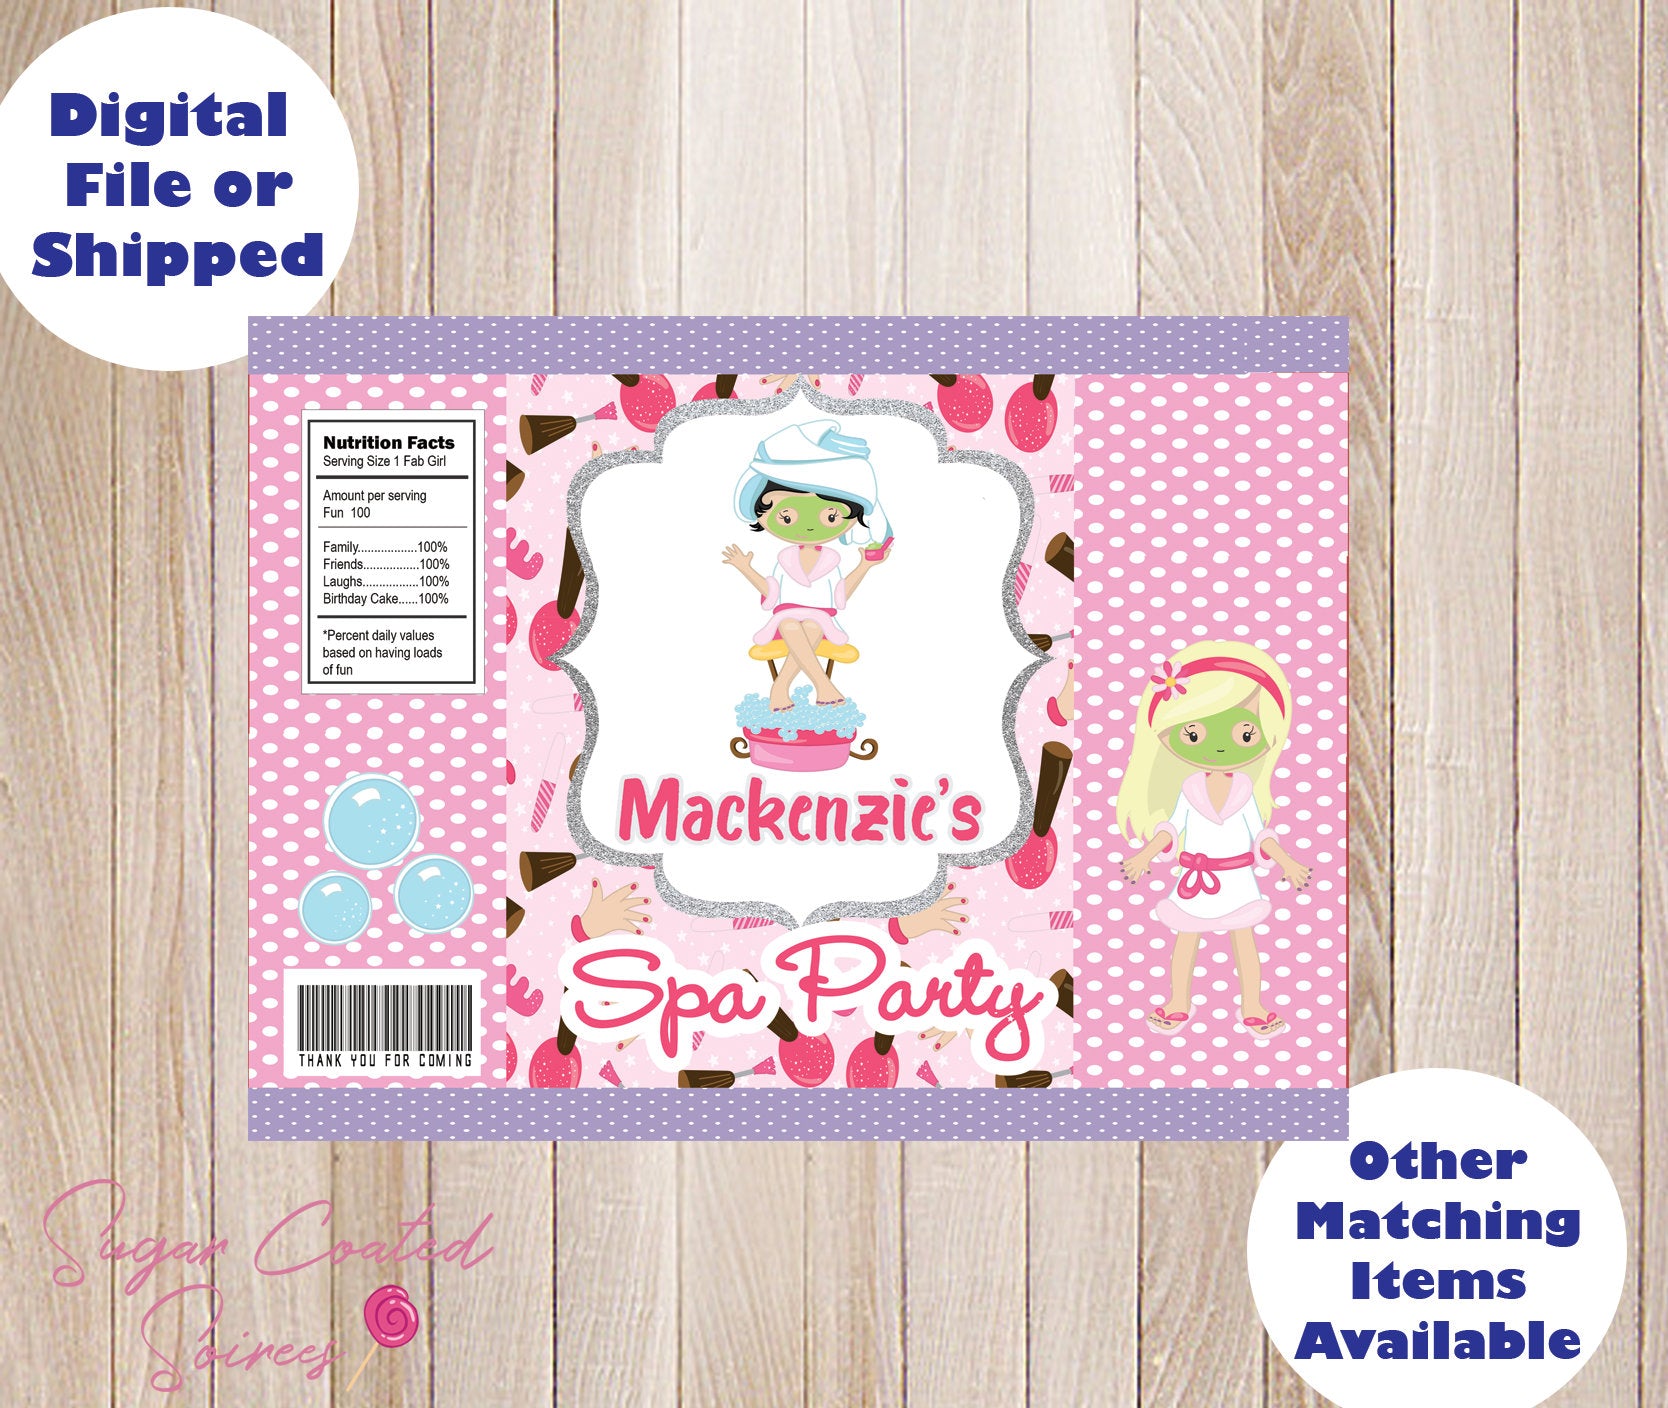 SHIPPED PRINTED Spa Girls Makeup Beauty Party Birthday chip / treat / party / favor / goodie / candy bag